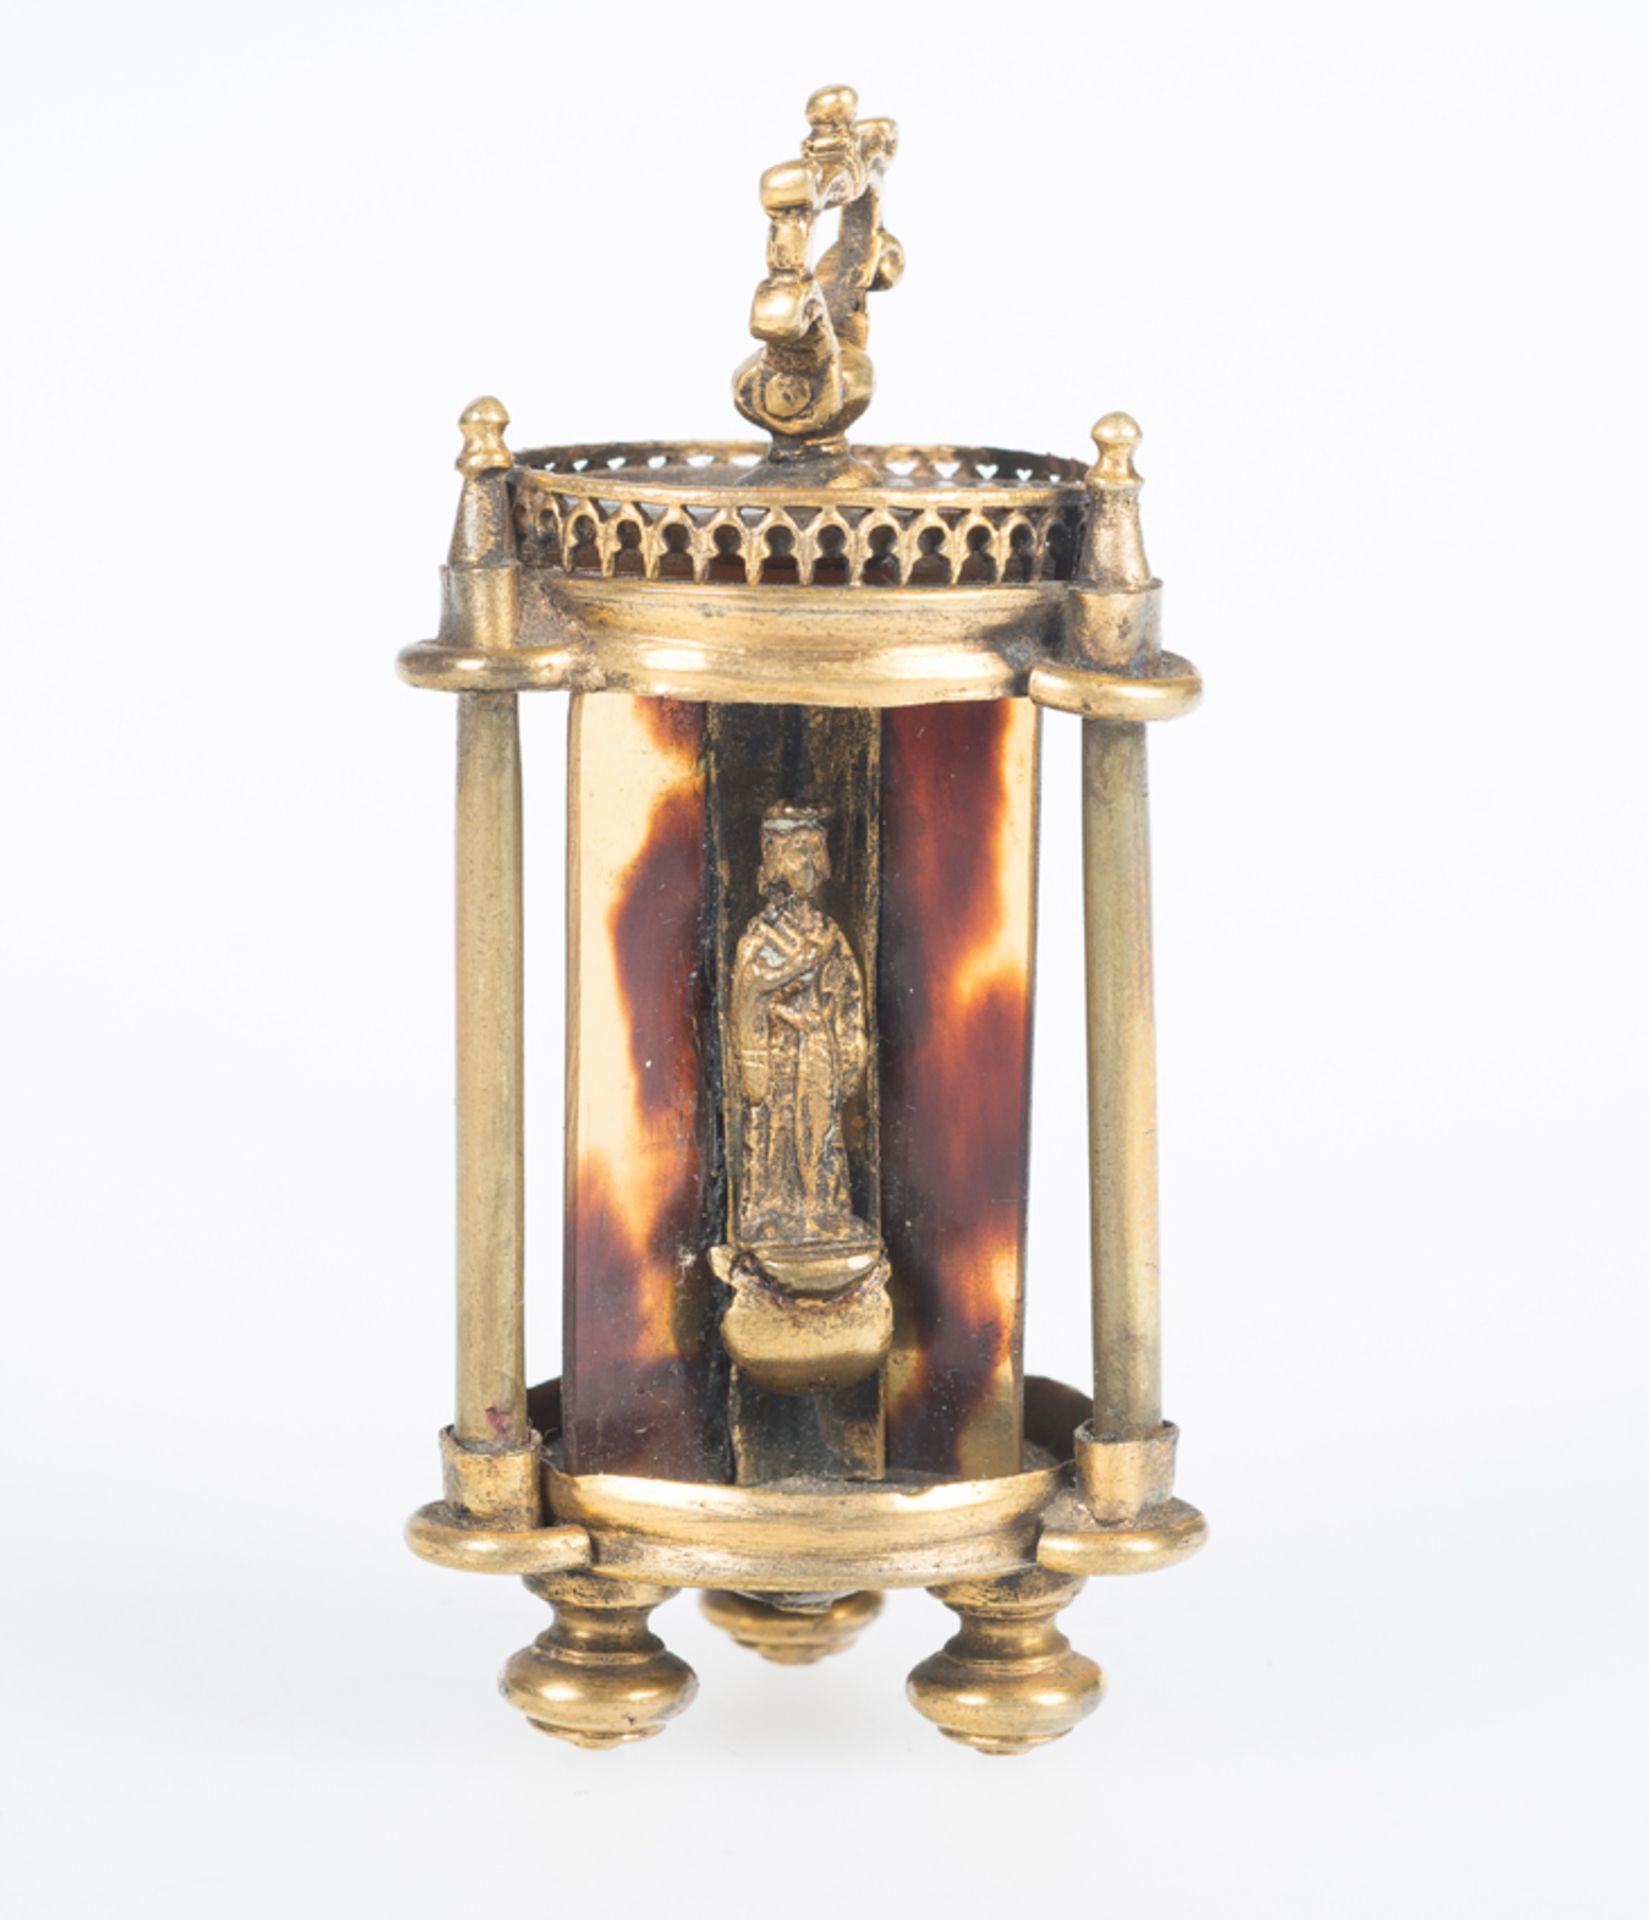 Small gilded bronze and tortoiseshell shrine pendant. Spain or Italy. 16th century. - Image 2 of 6